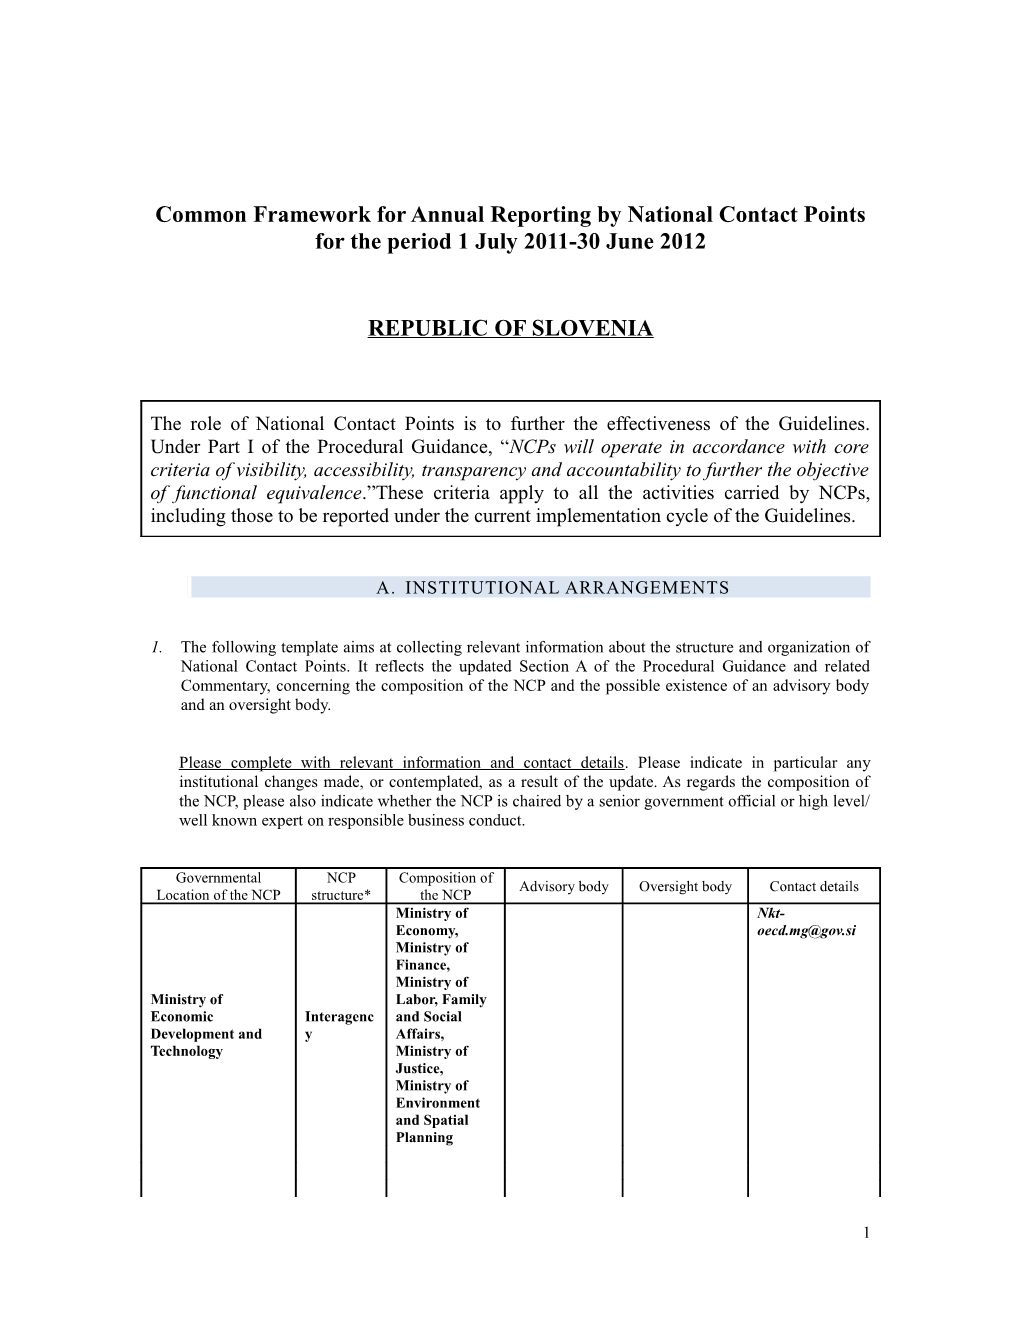 Report of National Contact Points to the Investment Committee